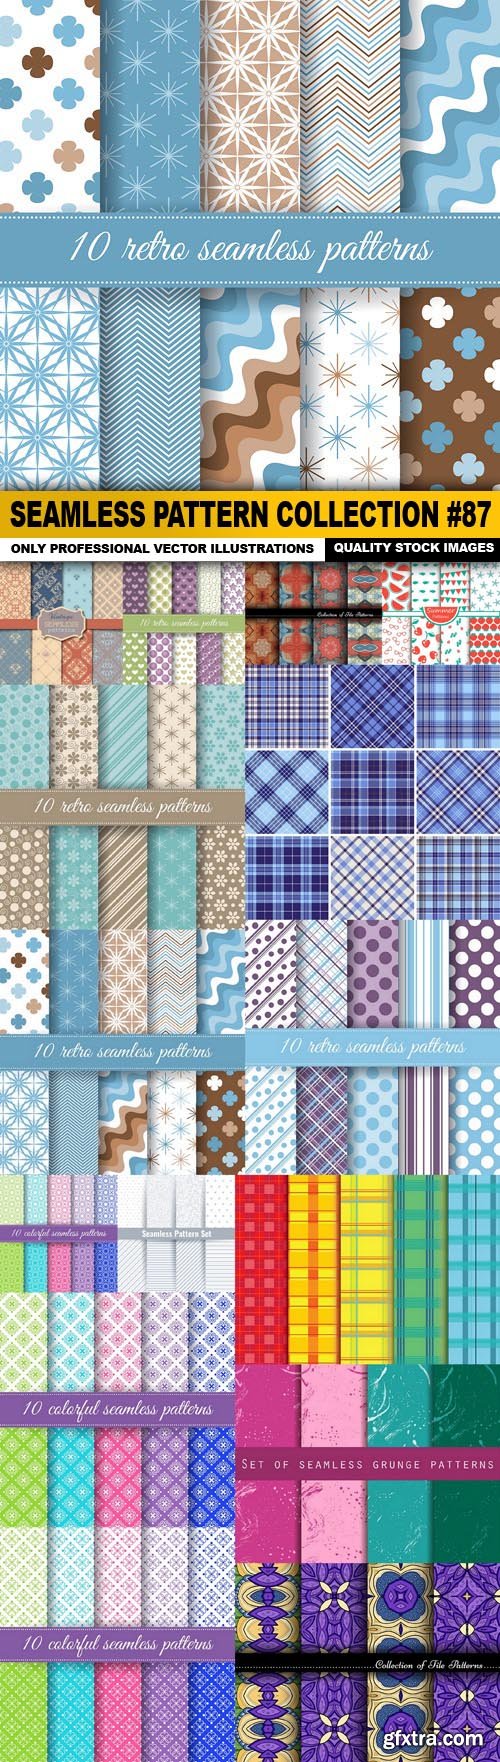 Seamless Pattern Collection #87 - 15 Vector